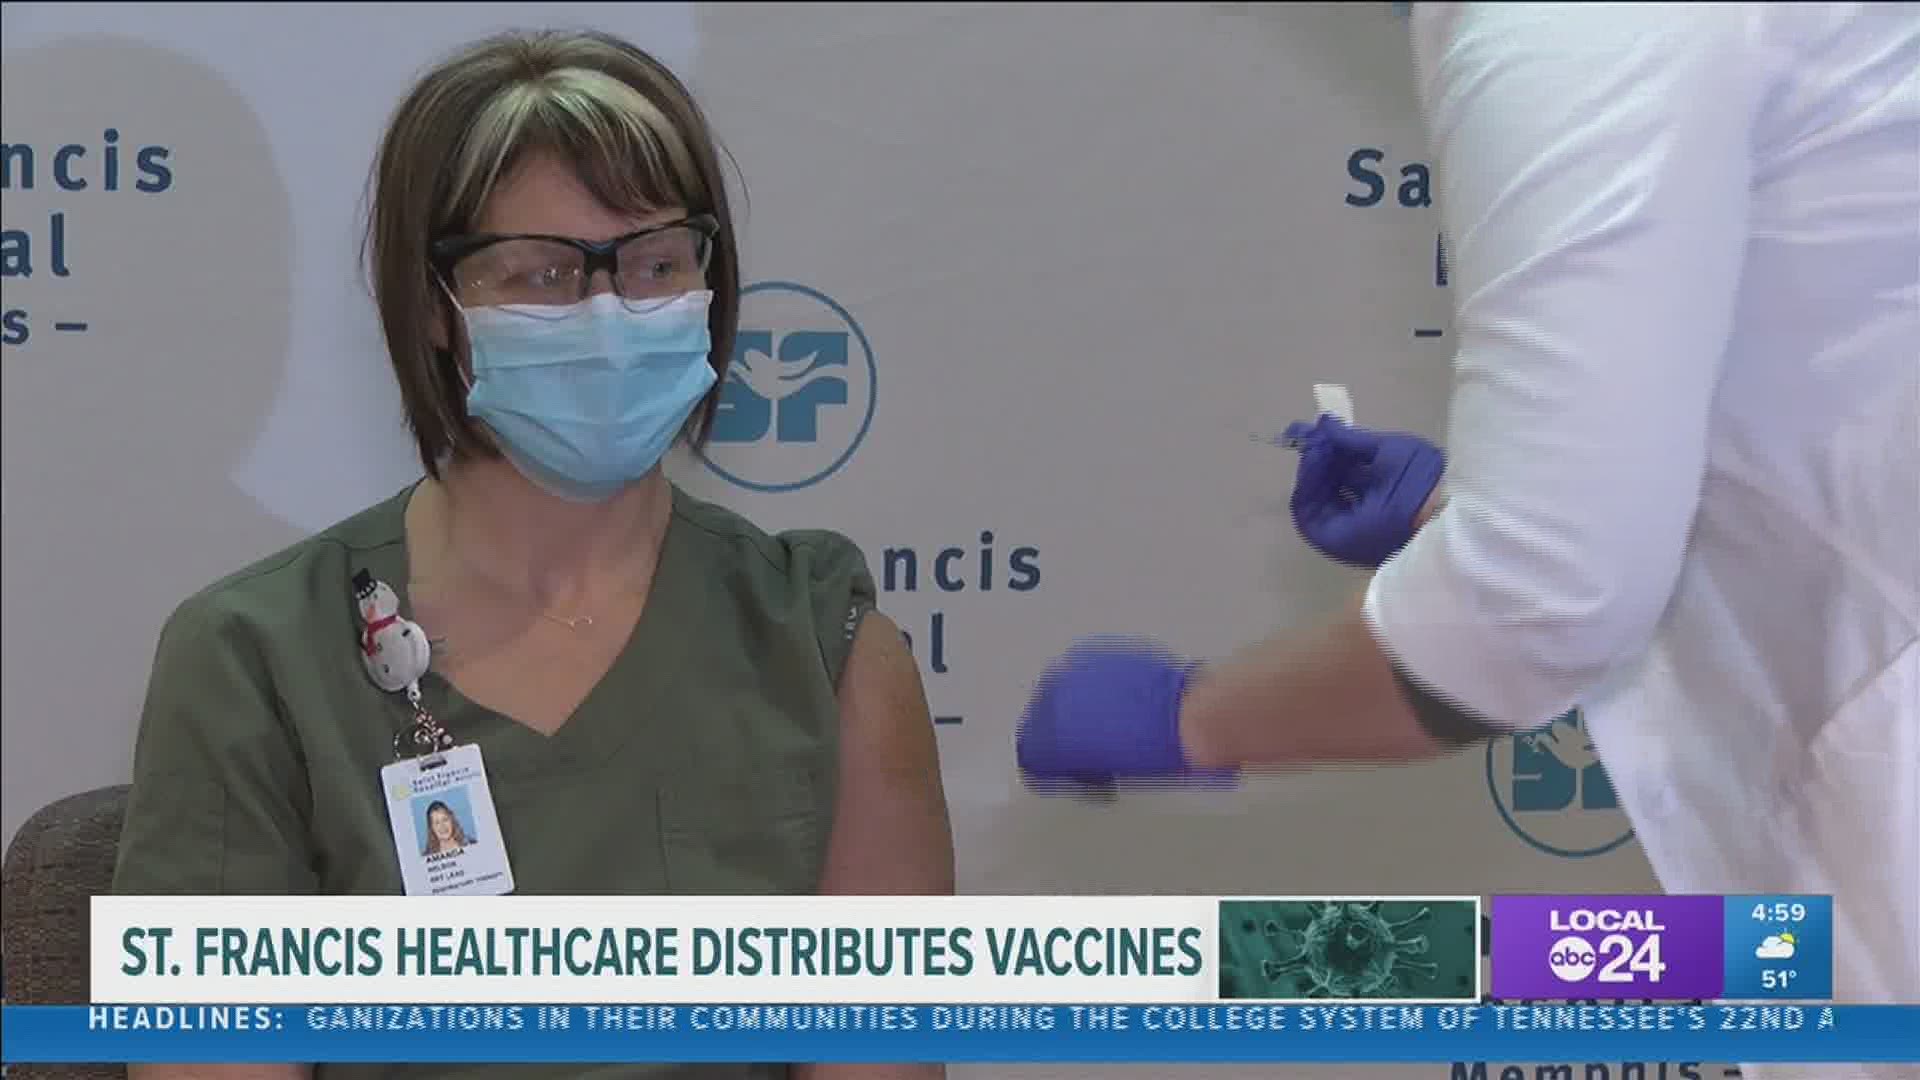 The vaccinations at St. Francis Memphis Friday continue a week of vaccinations for those treating COVID-19 at hospitals across Mid-South.